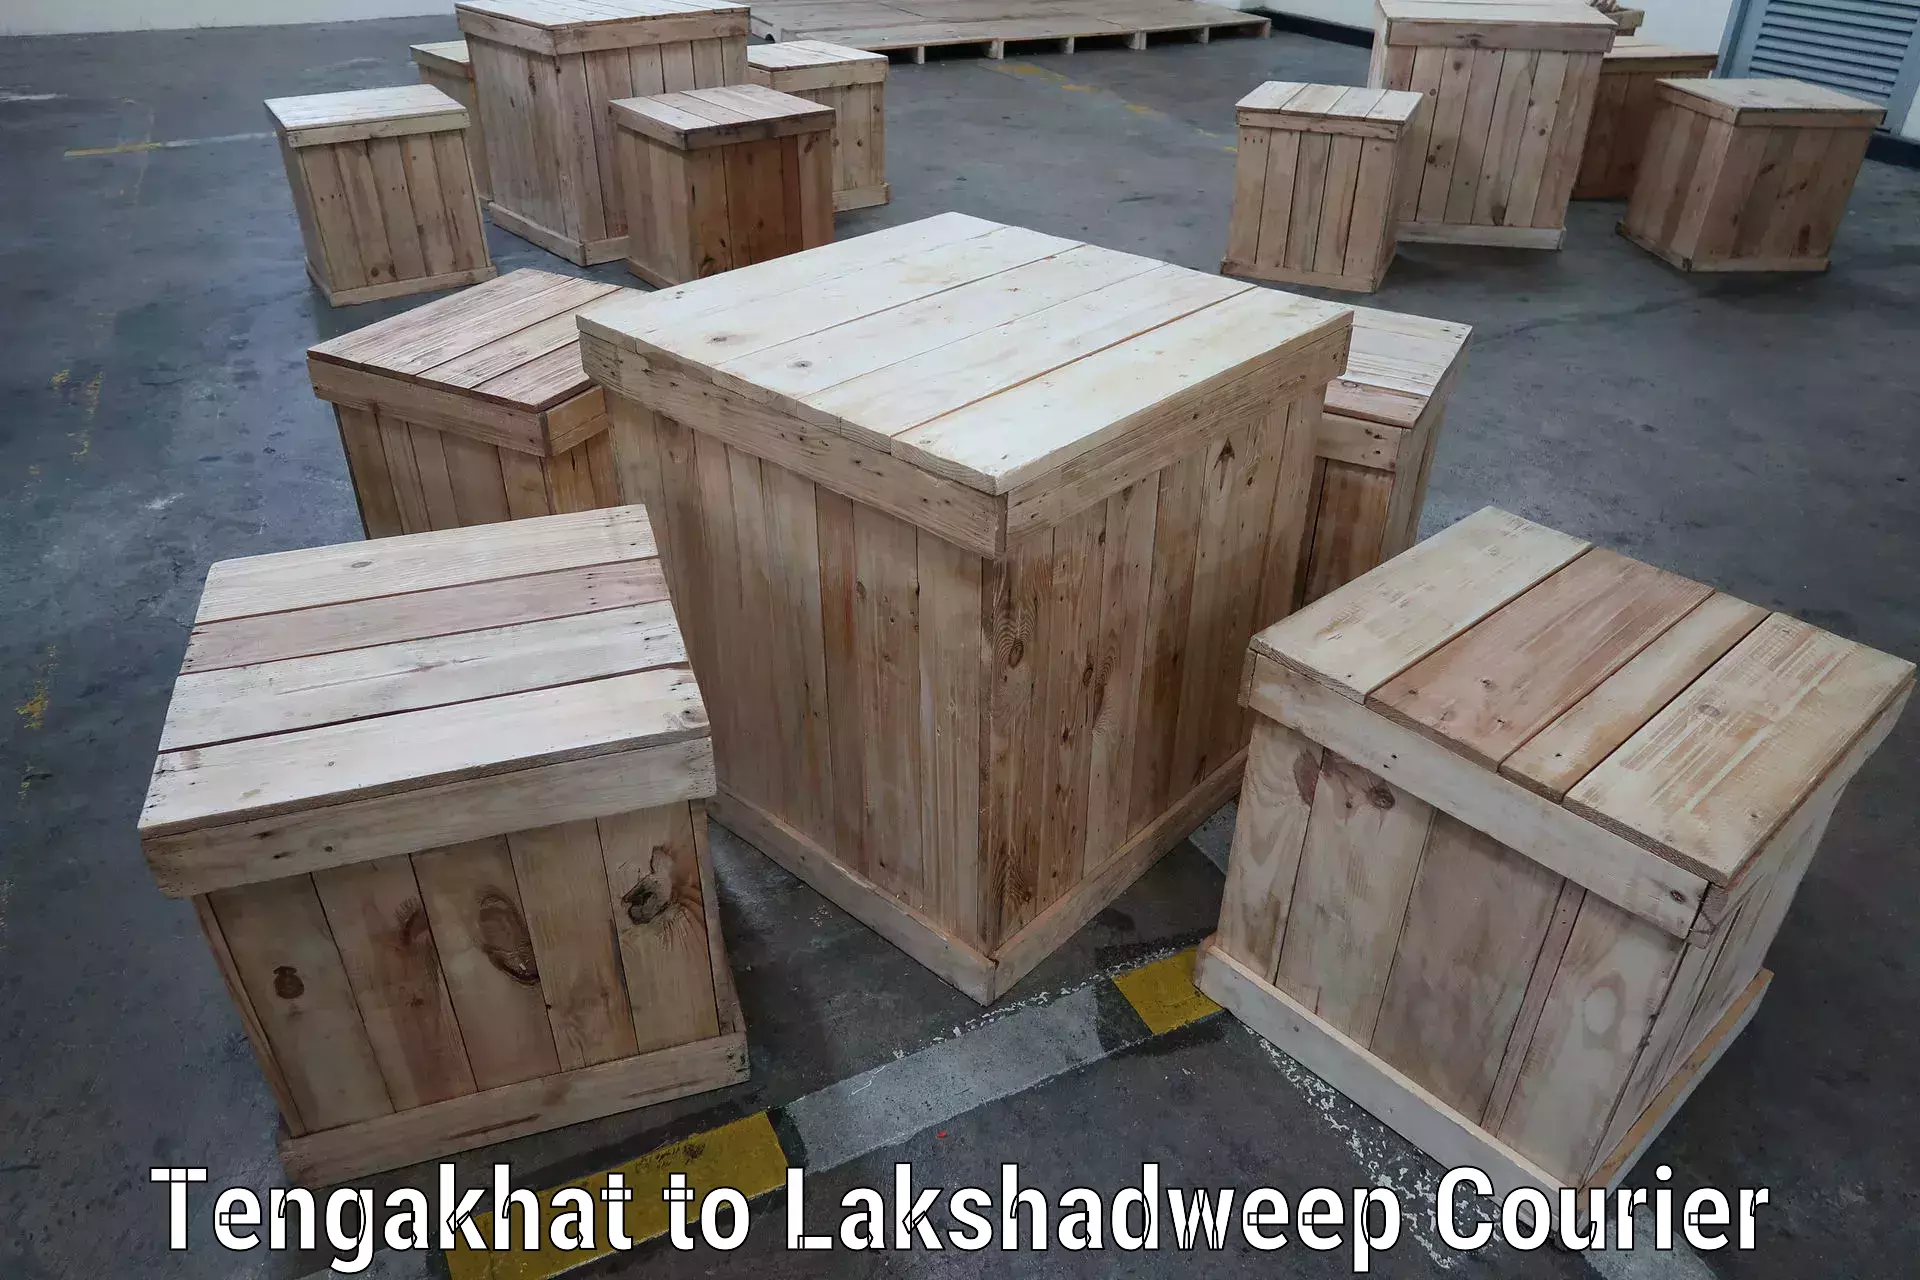 Weekend courier service Tengakhat to Lakshadweep